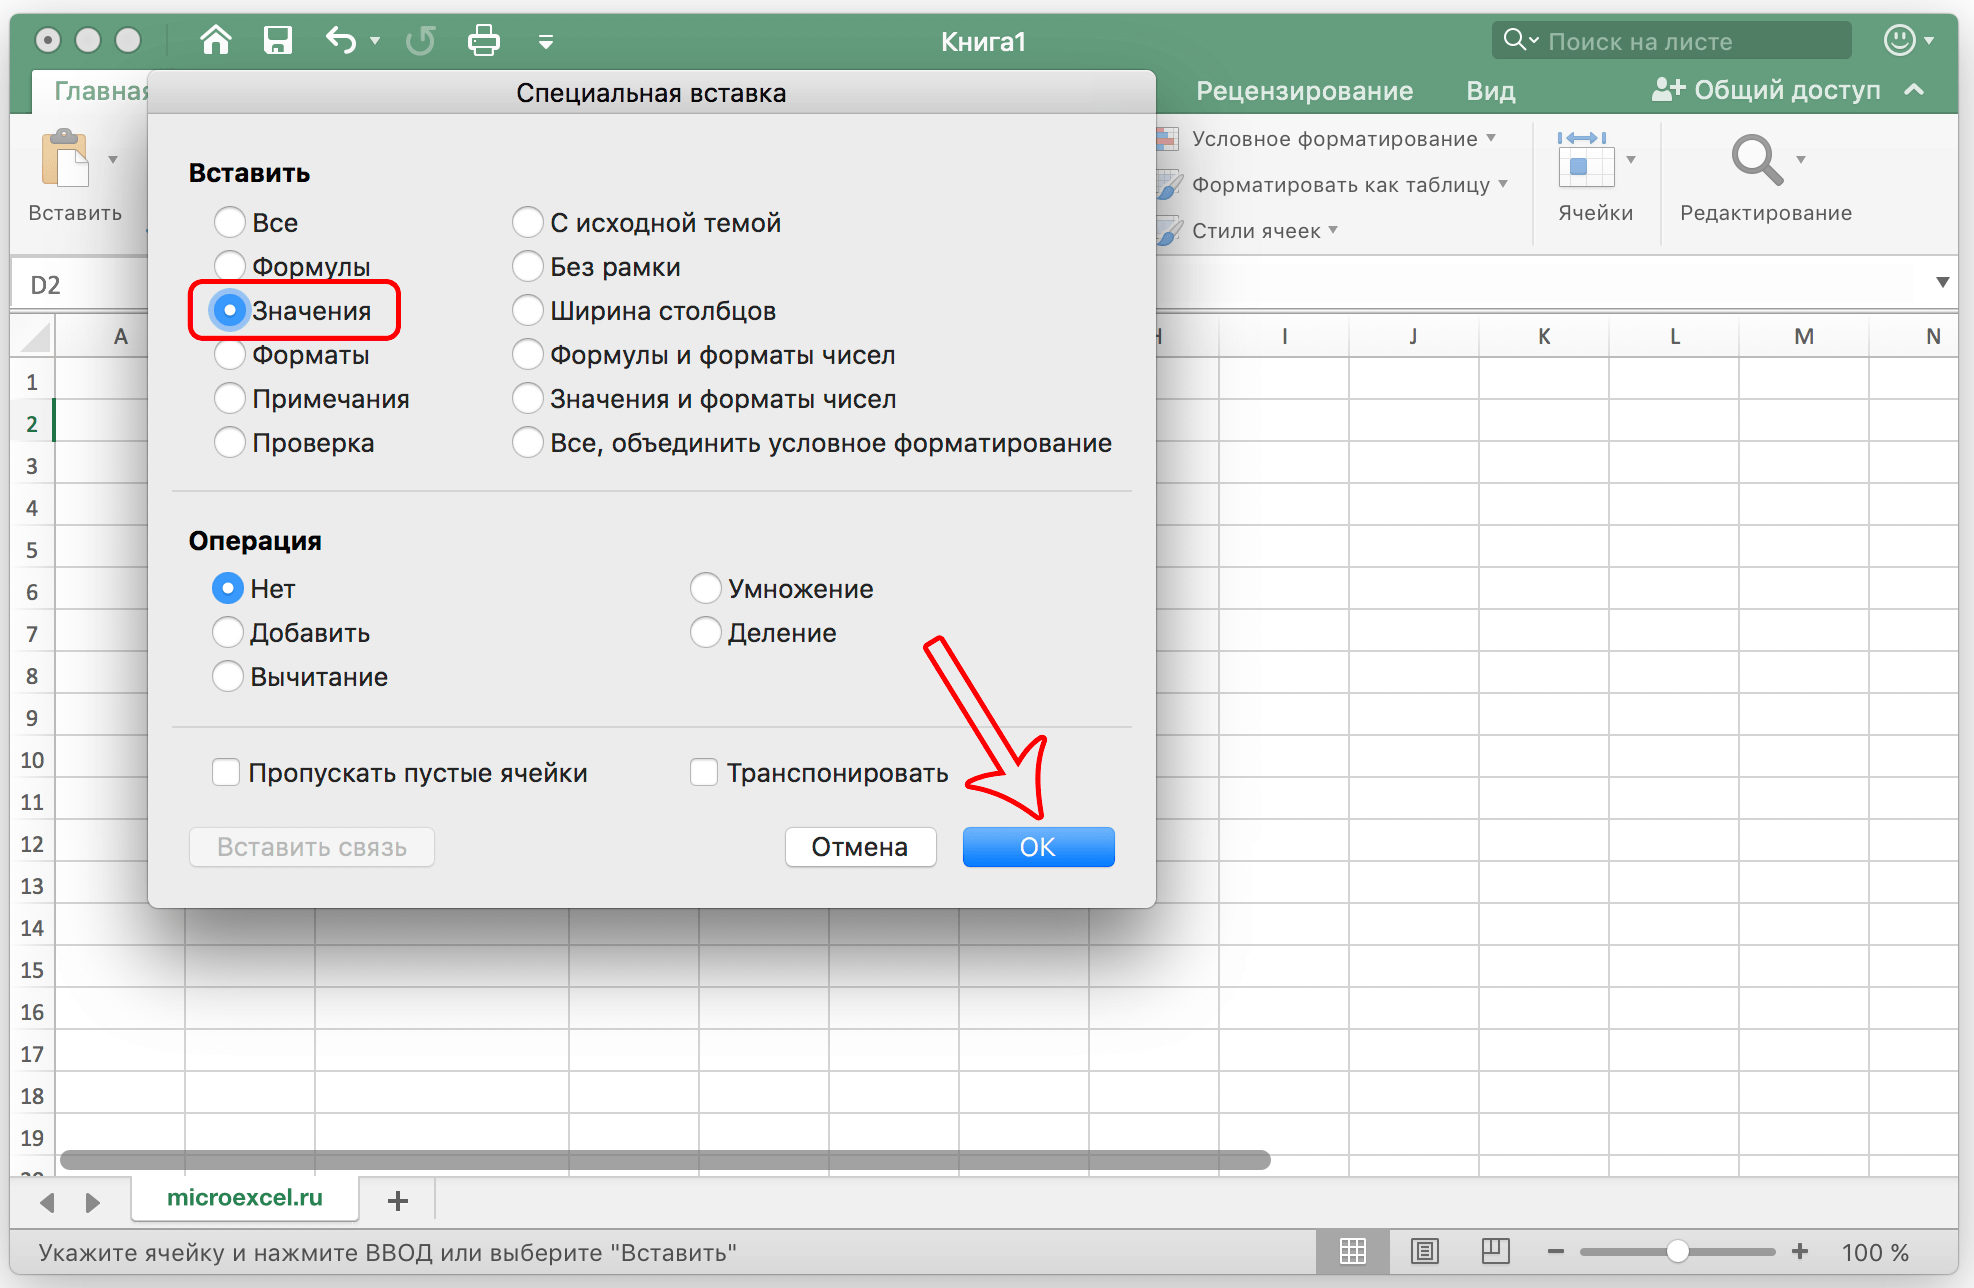 How to merge cells in an excel spreadsheet. Through the context menu and without data loss